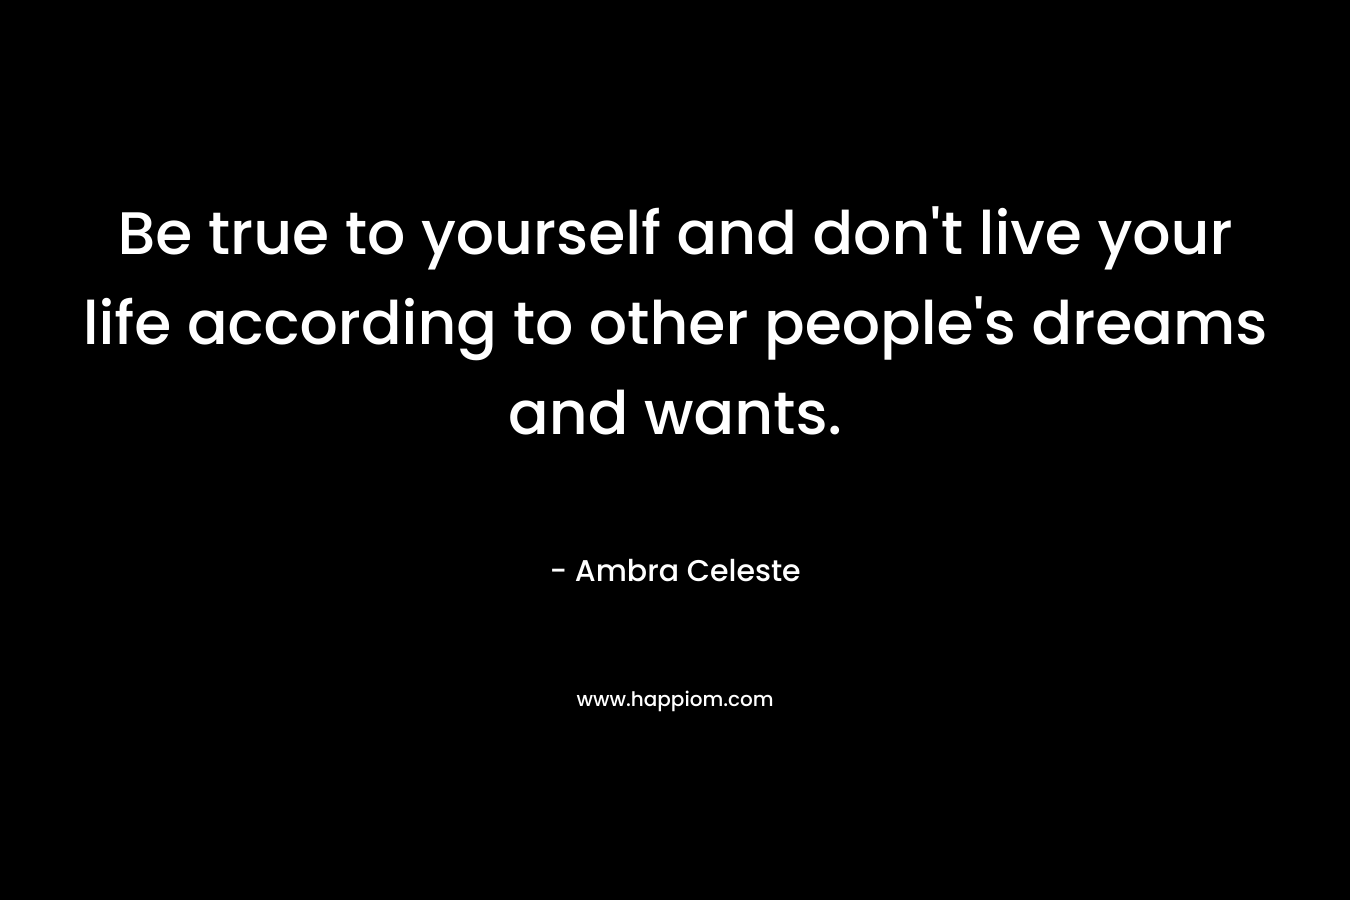 Be true to yourself and don't live your life according to other people's dreams and wants.